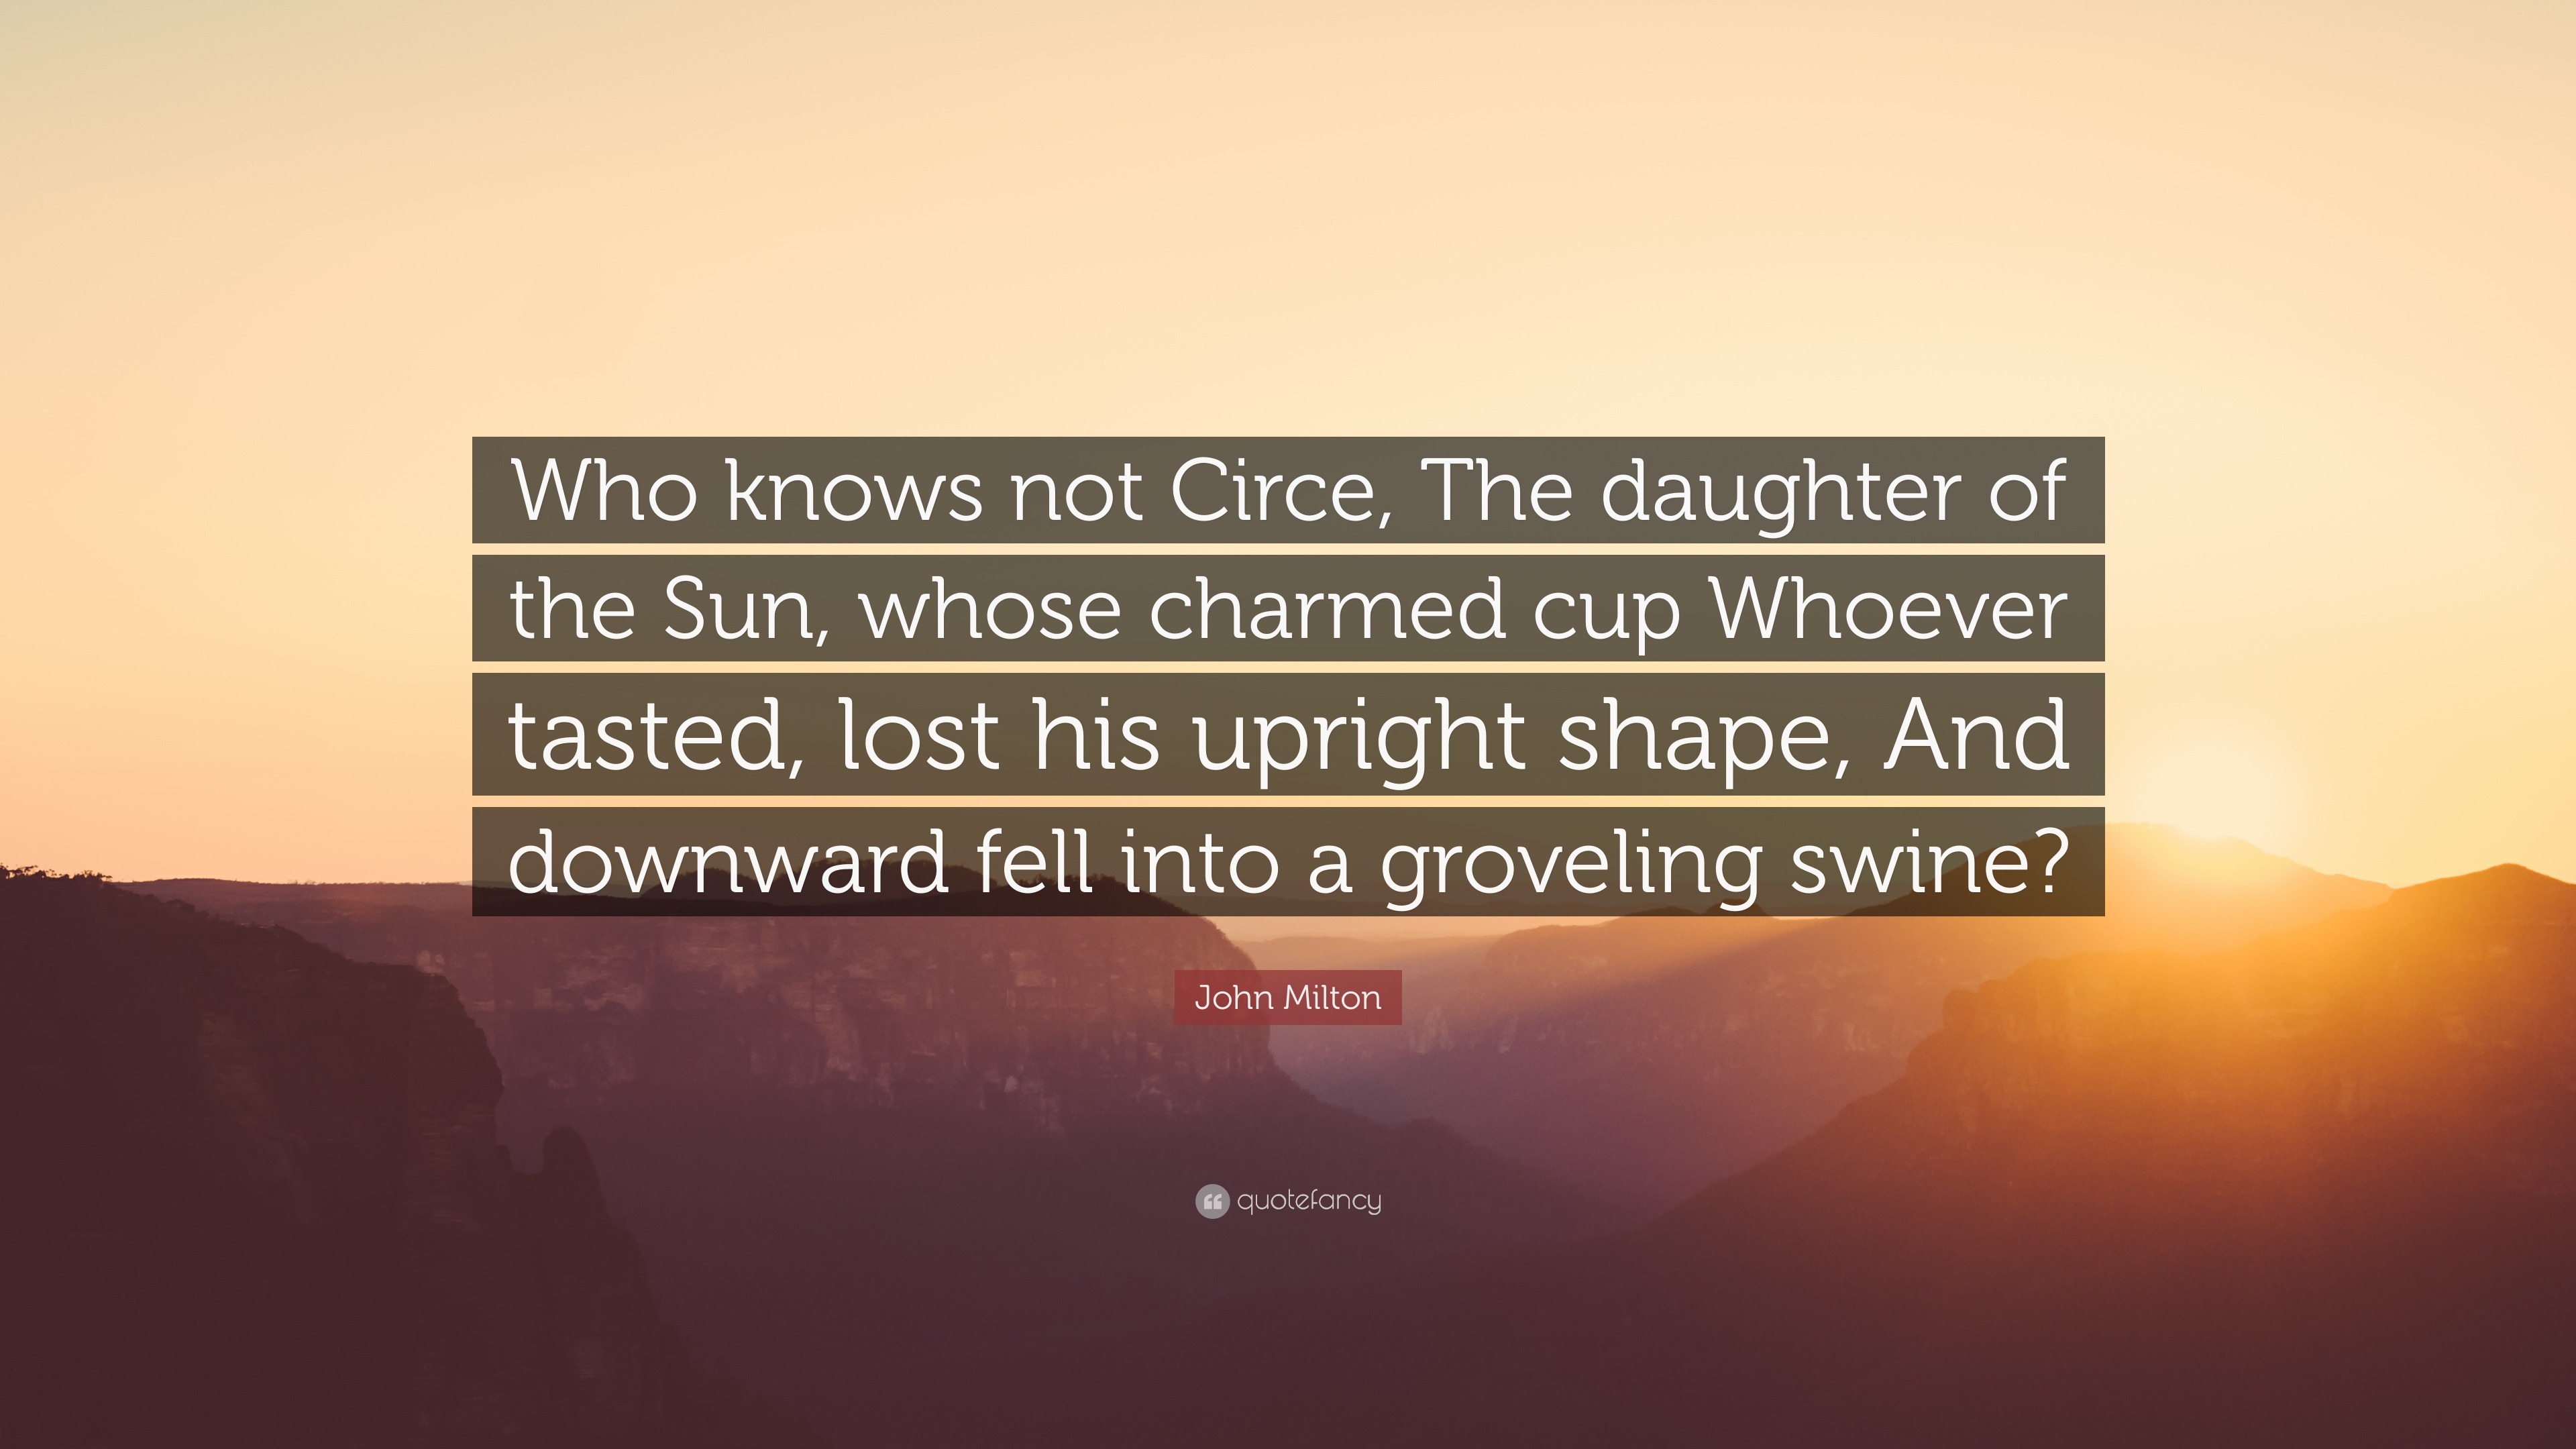 John Milton Quote Who Knows Not Circe The Daughter Of The Sun Whose Charmed Cup Whoever Tasted Lost His Upright Shape And Downward Fel 7 Wallpapers Quotefancy